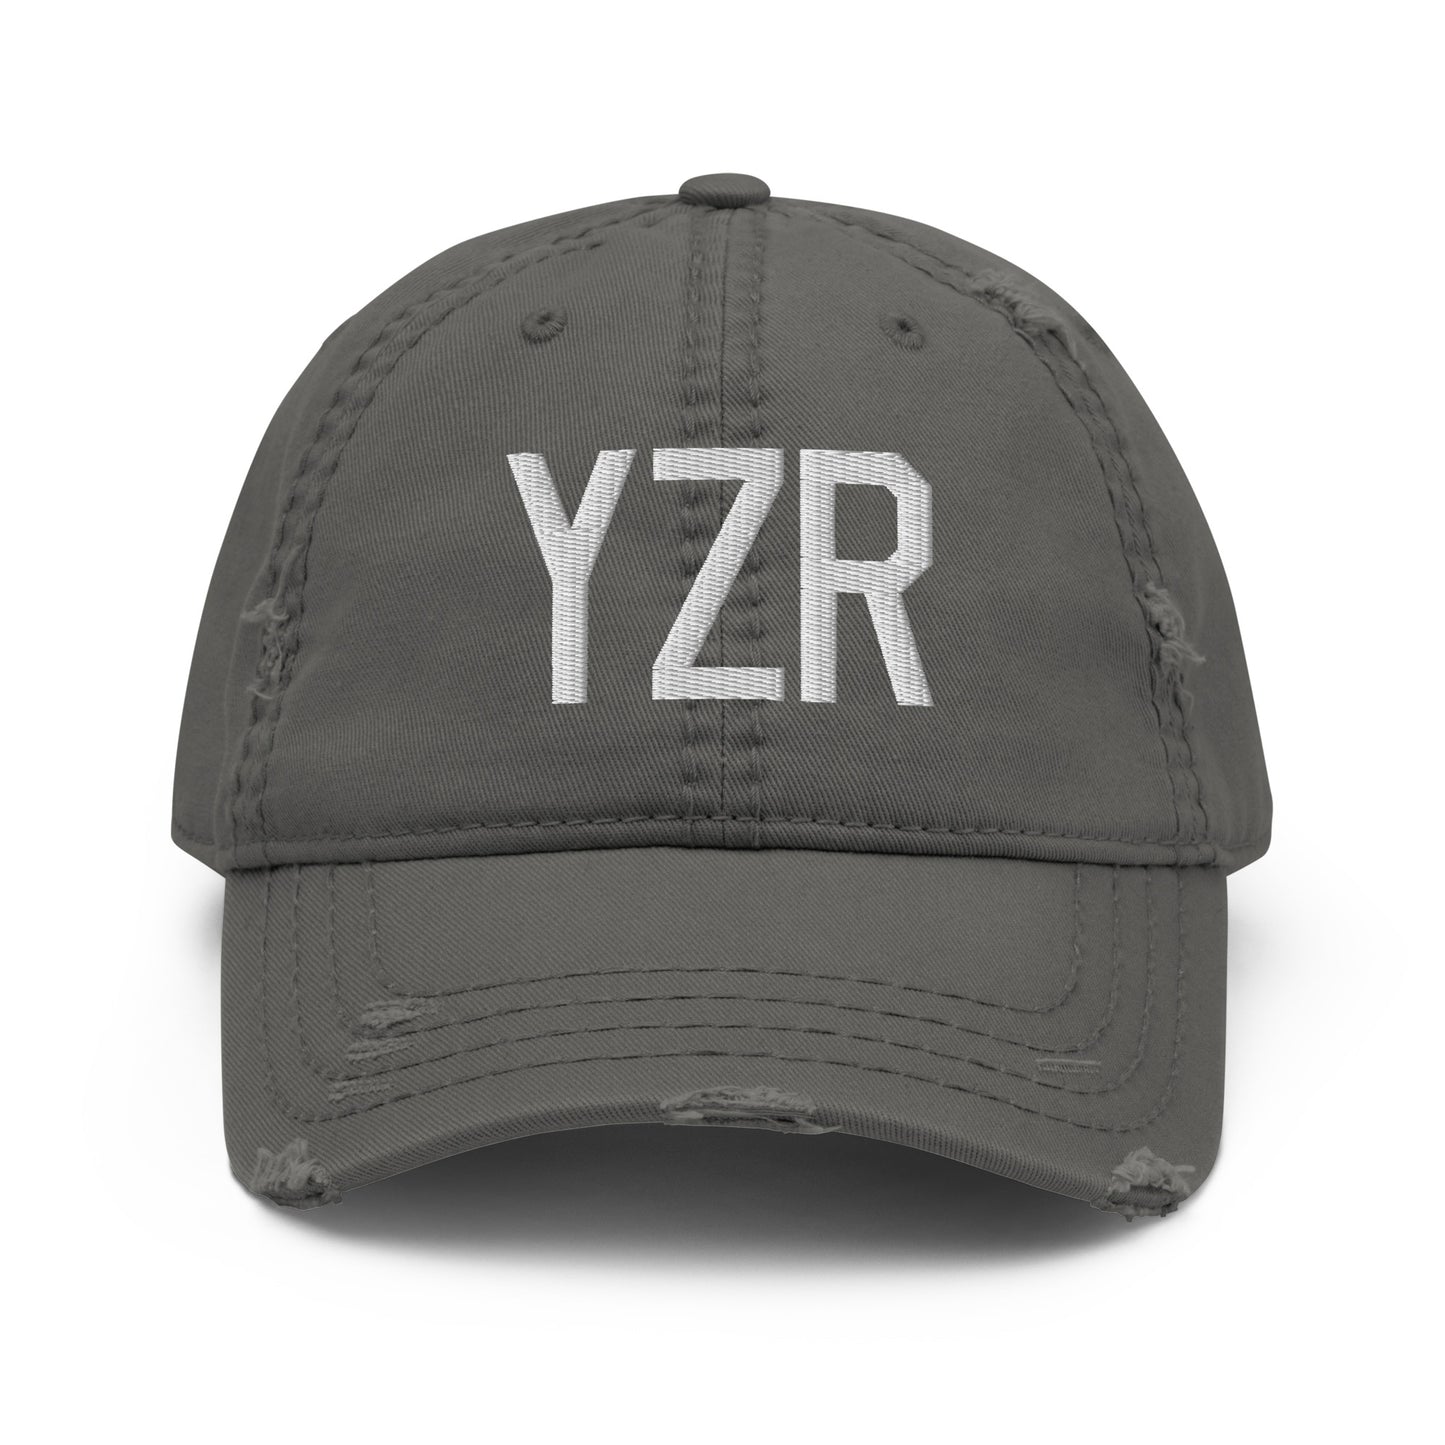 Airport Code Distressed Hat - White • YZR Sarnia • YHM Designs - Image 15